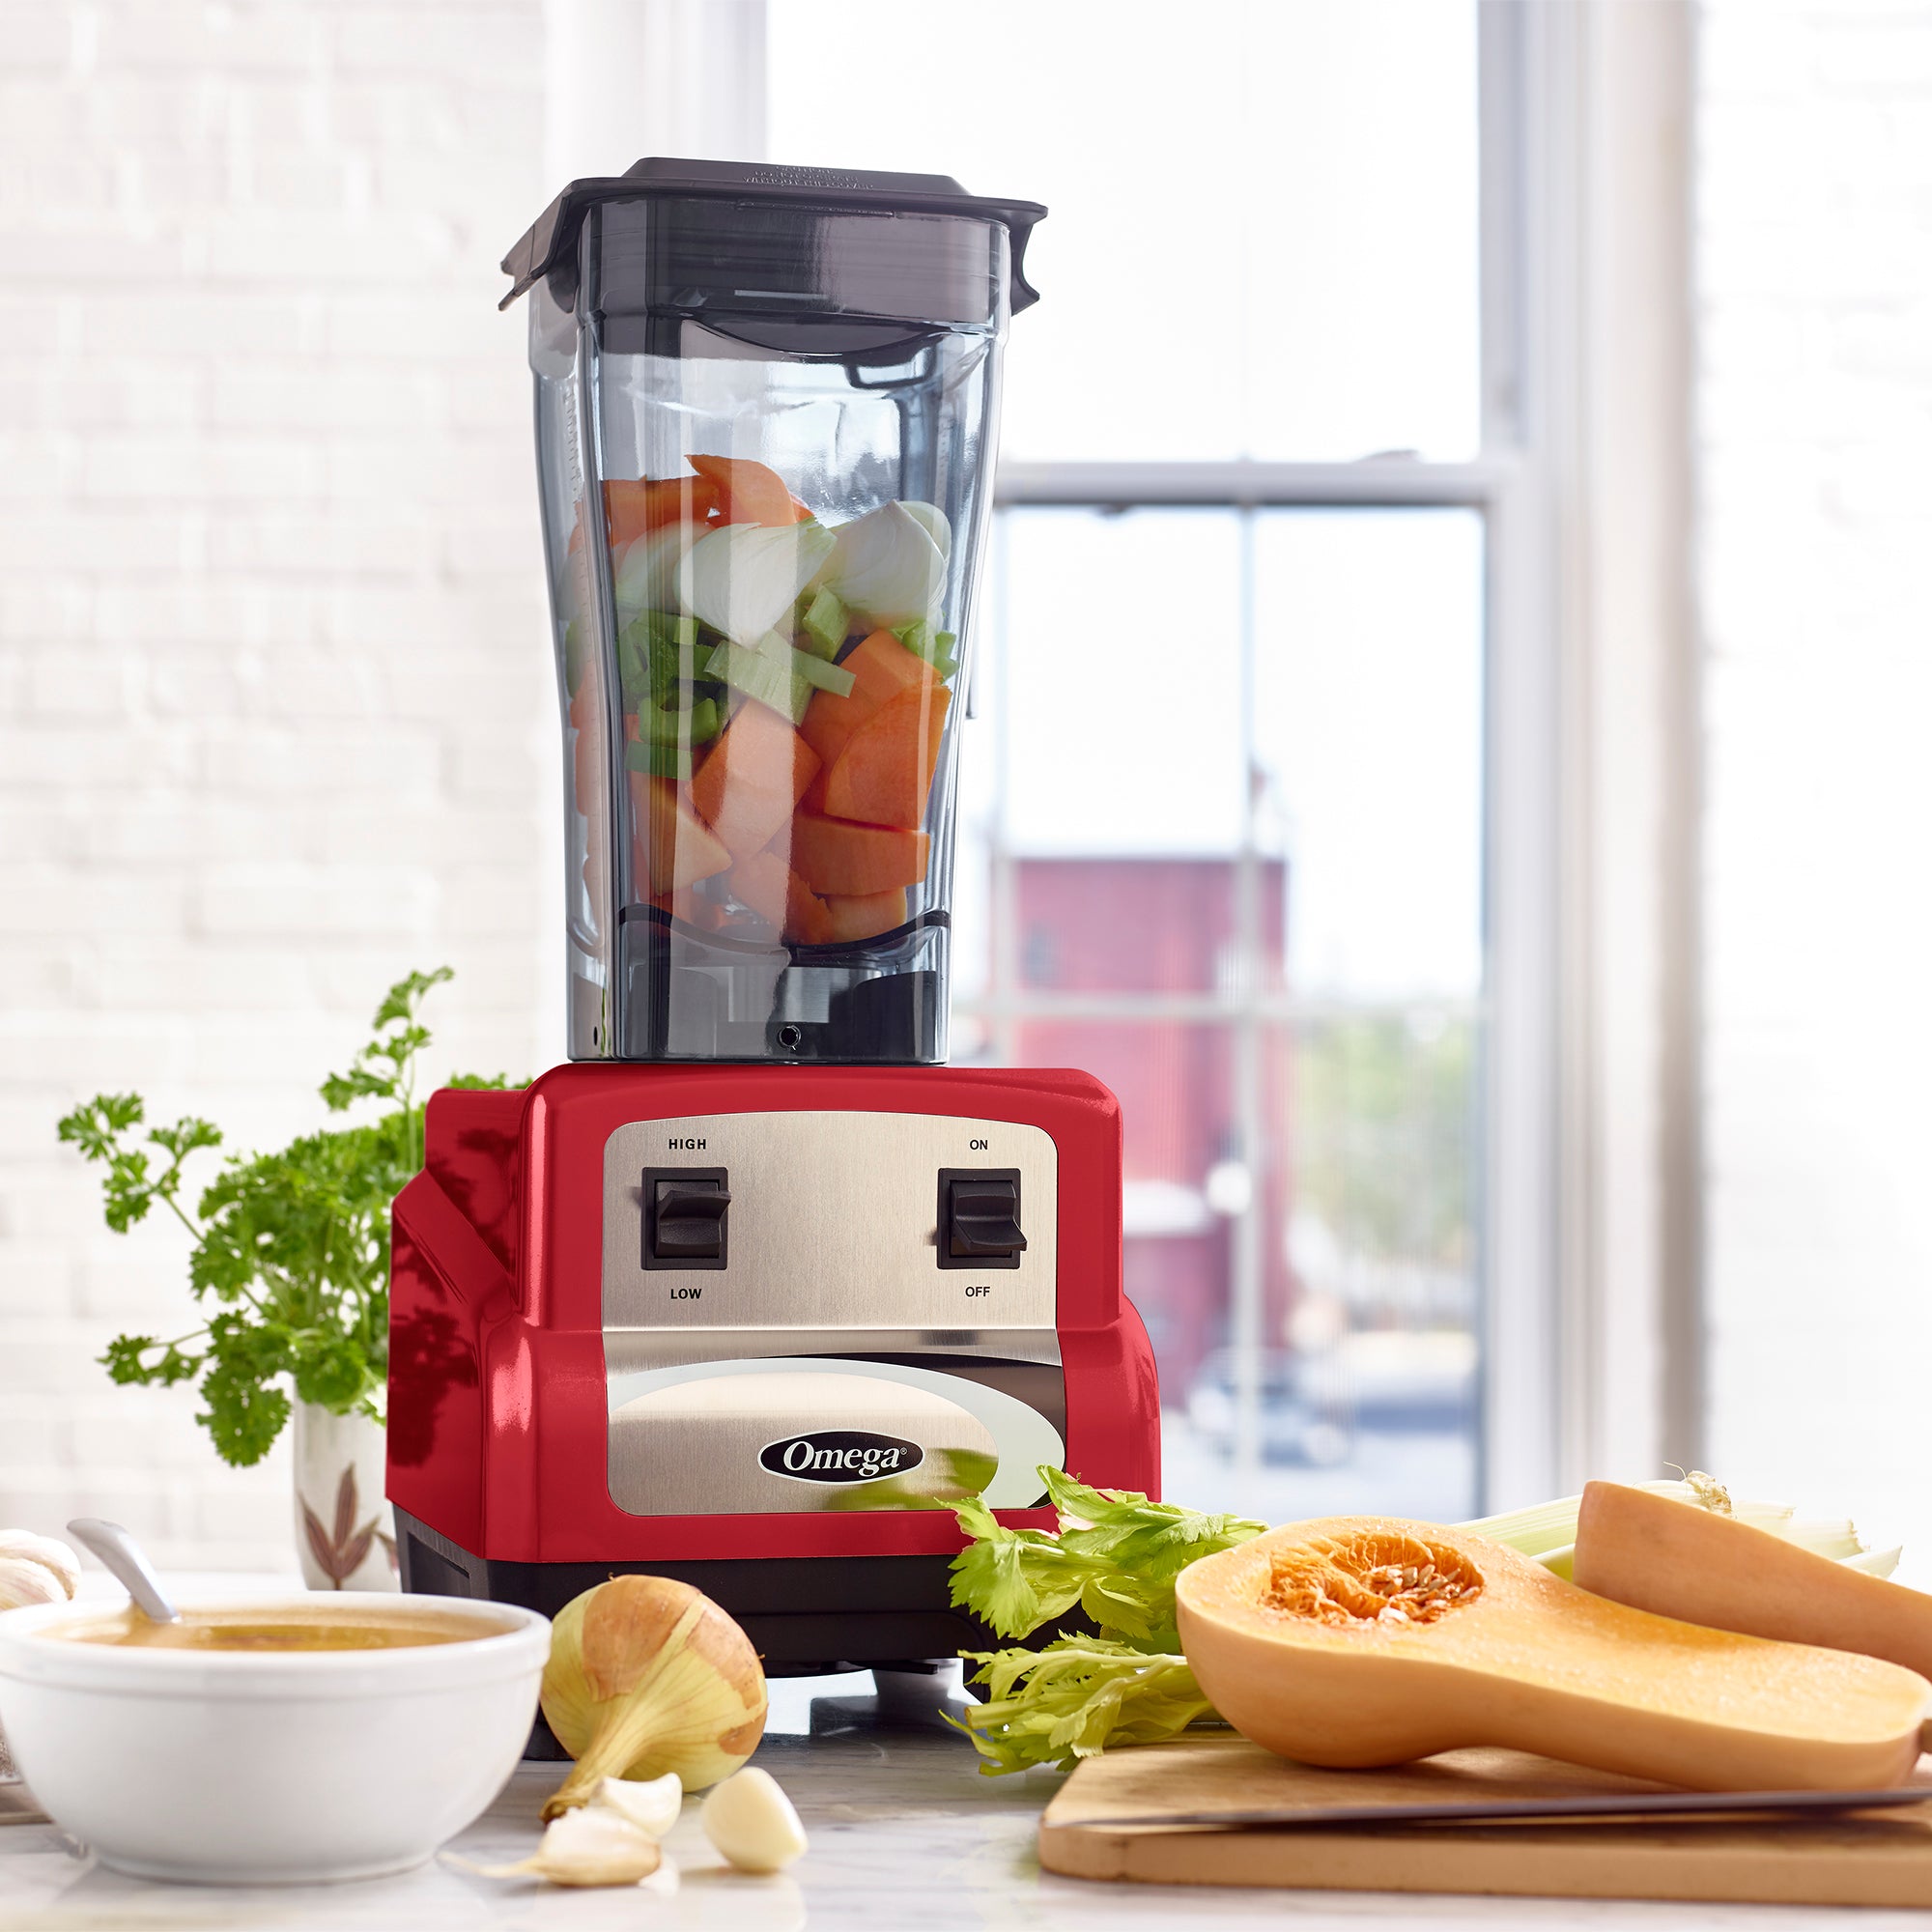 Automatic Commercial Food Blender With Adjustable Time 3 hp 118 oz.